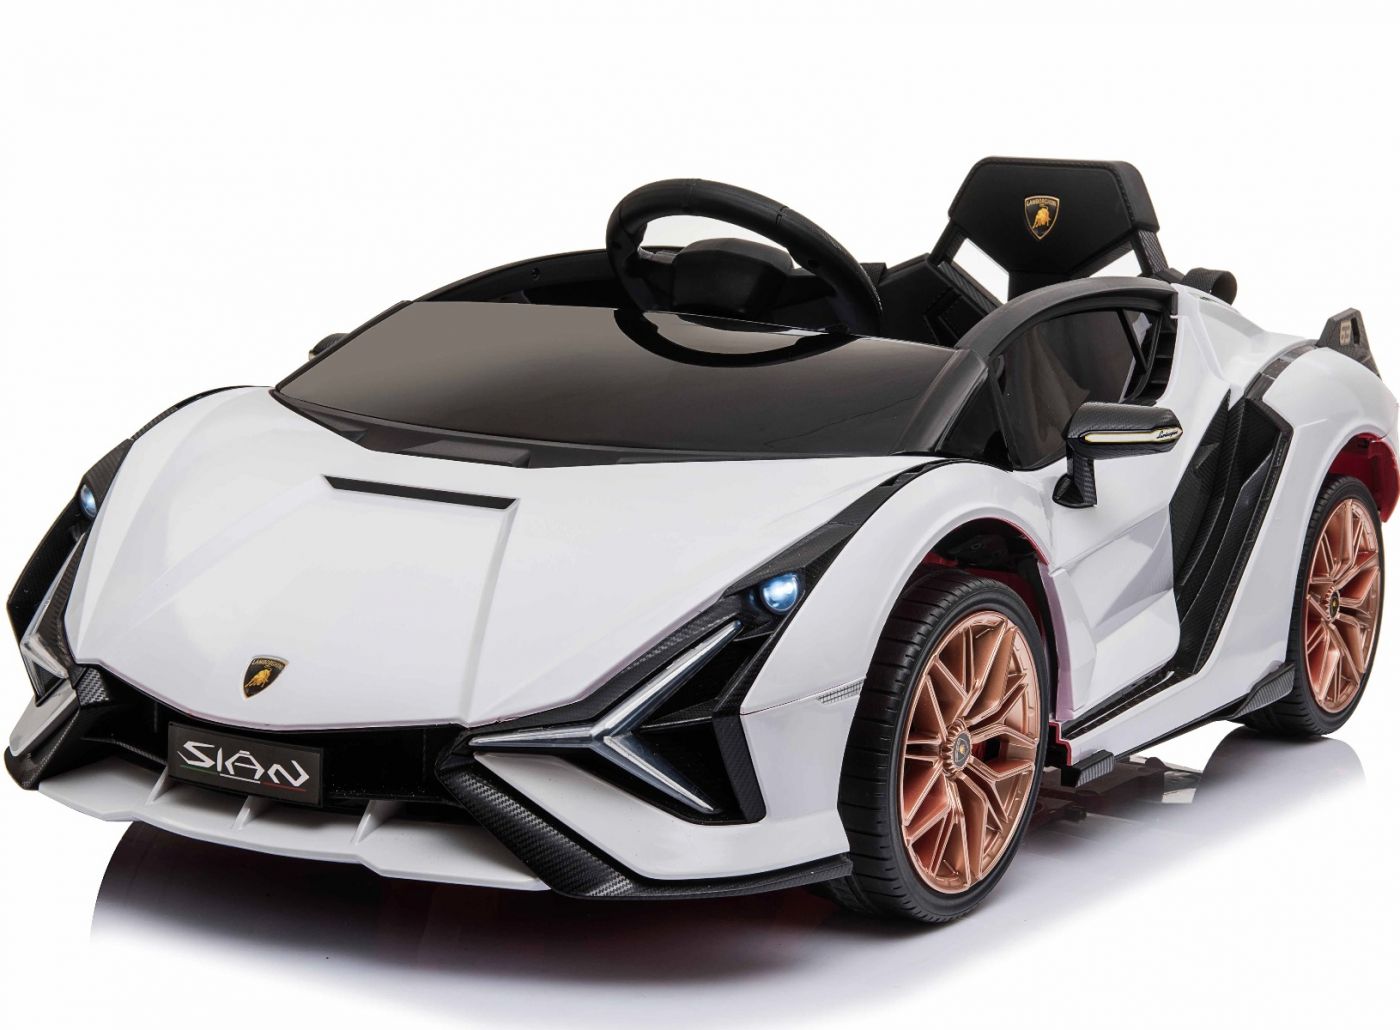 "12V White Lamborghini Sian Electric Ride on Car for kids, featuring unique design with MP4 screen and parental control."